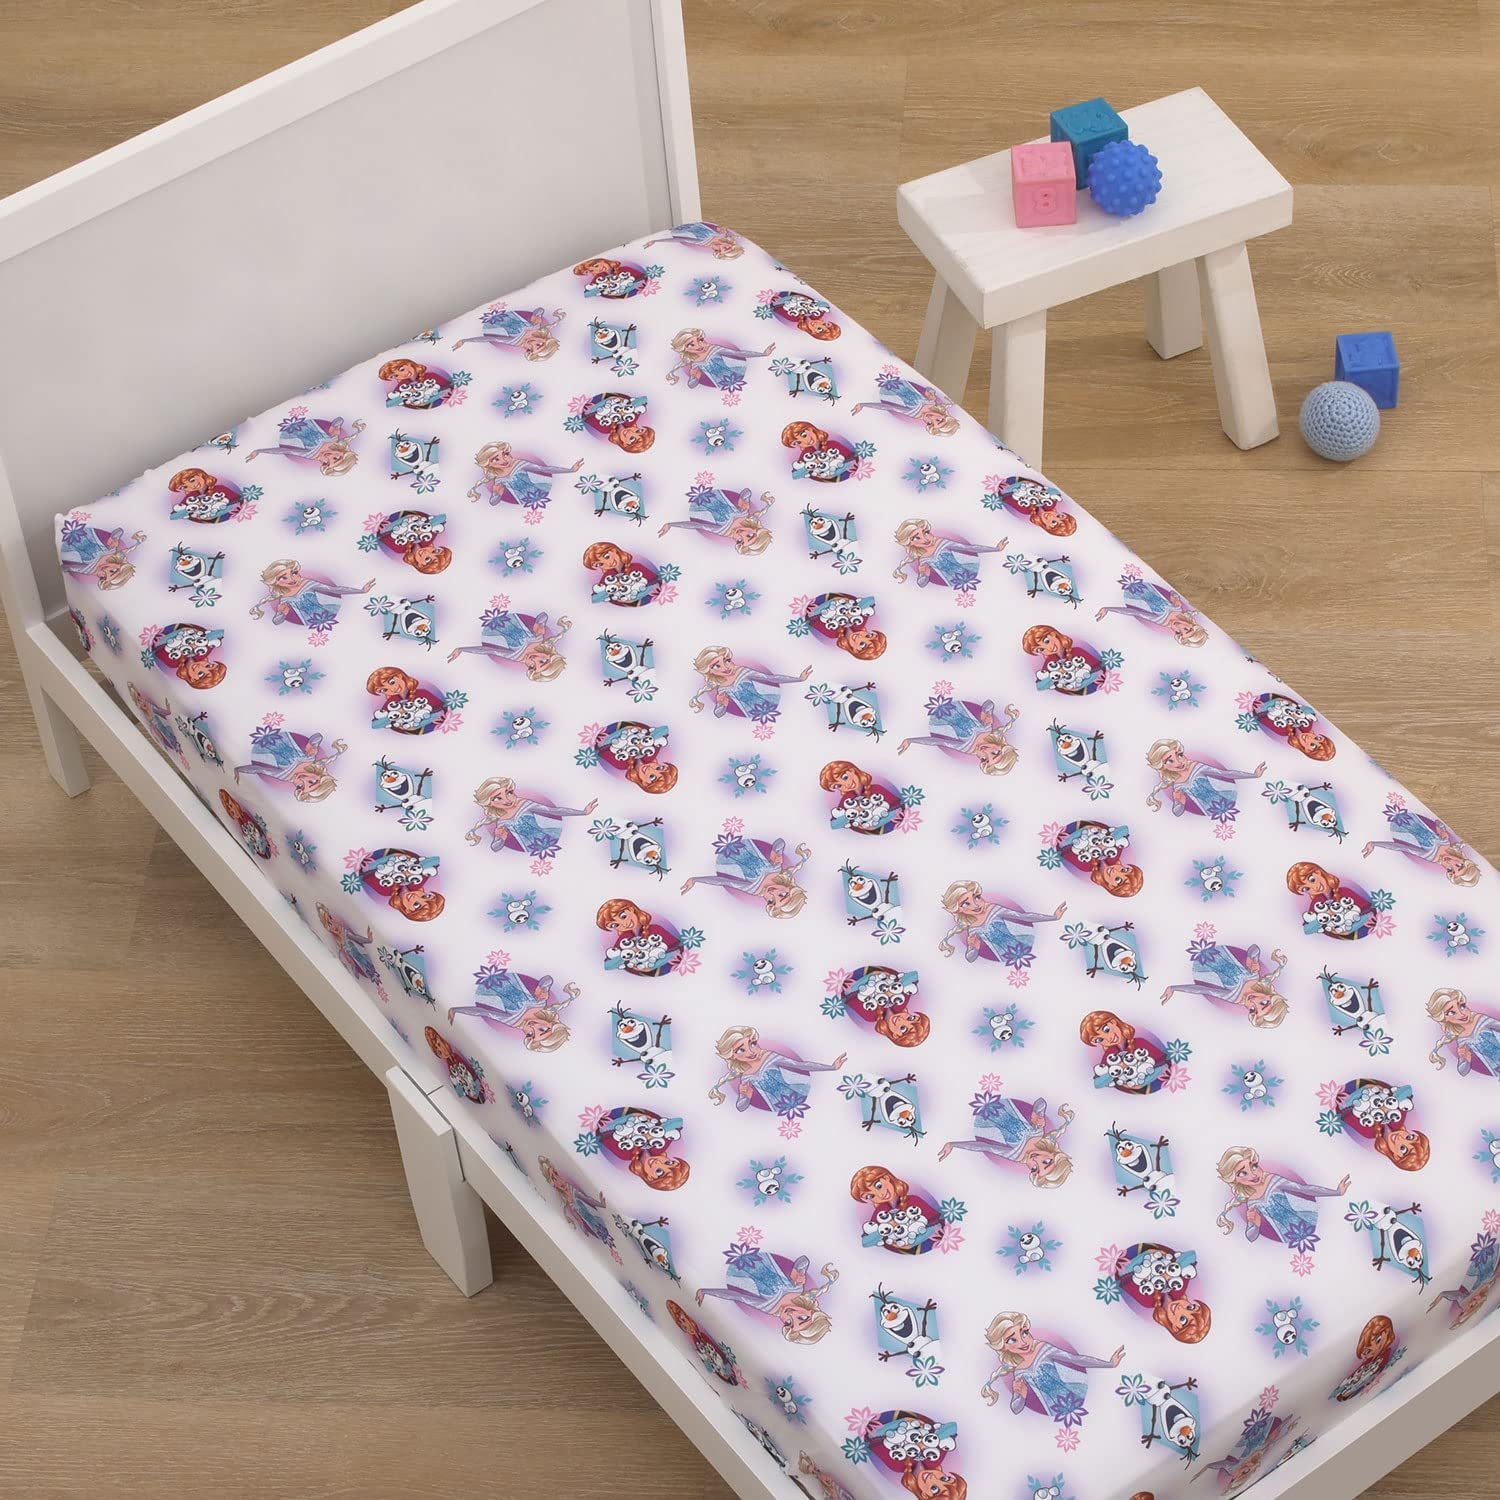 Disney Frozen Fitted Crib Sheet 100% Soft Microfiber, Baby Sheet, Fits Standard Size Crib Mattress 28in x 52in - image 2 of 4